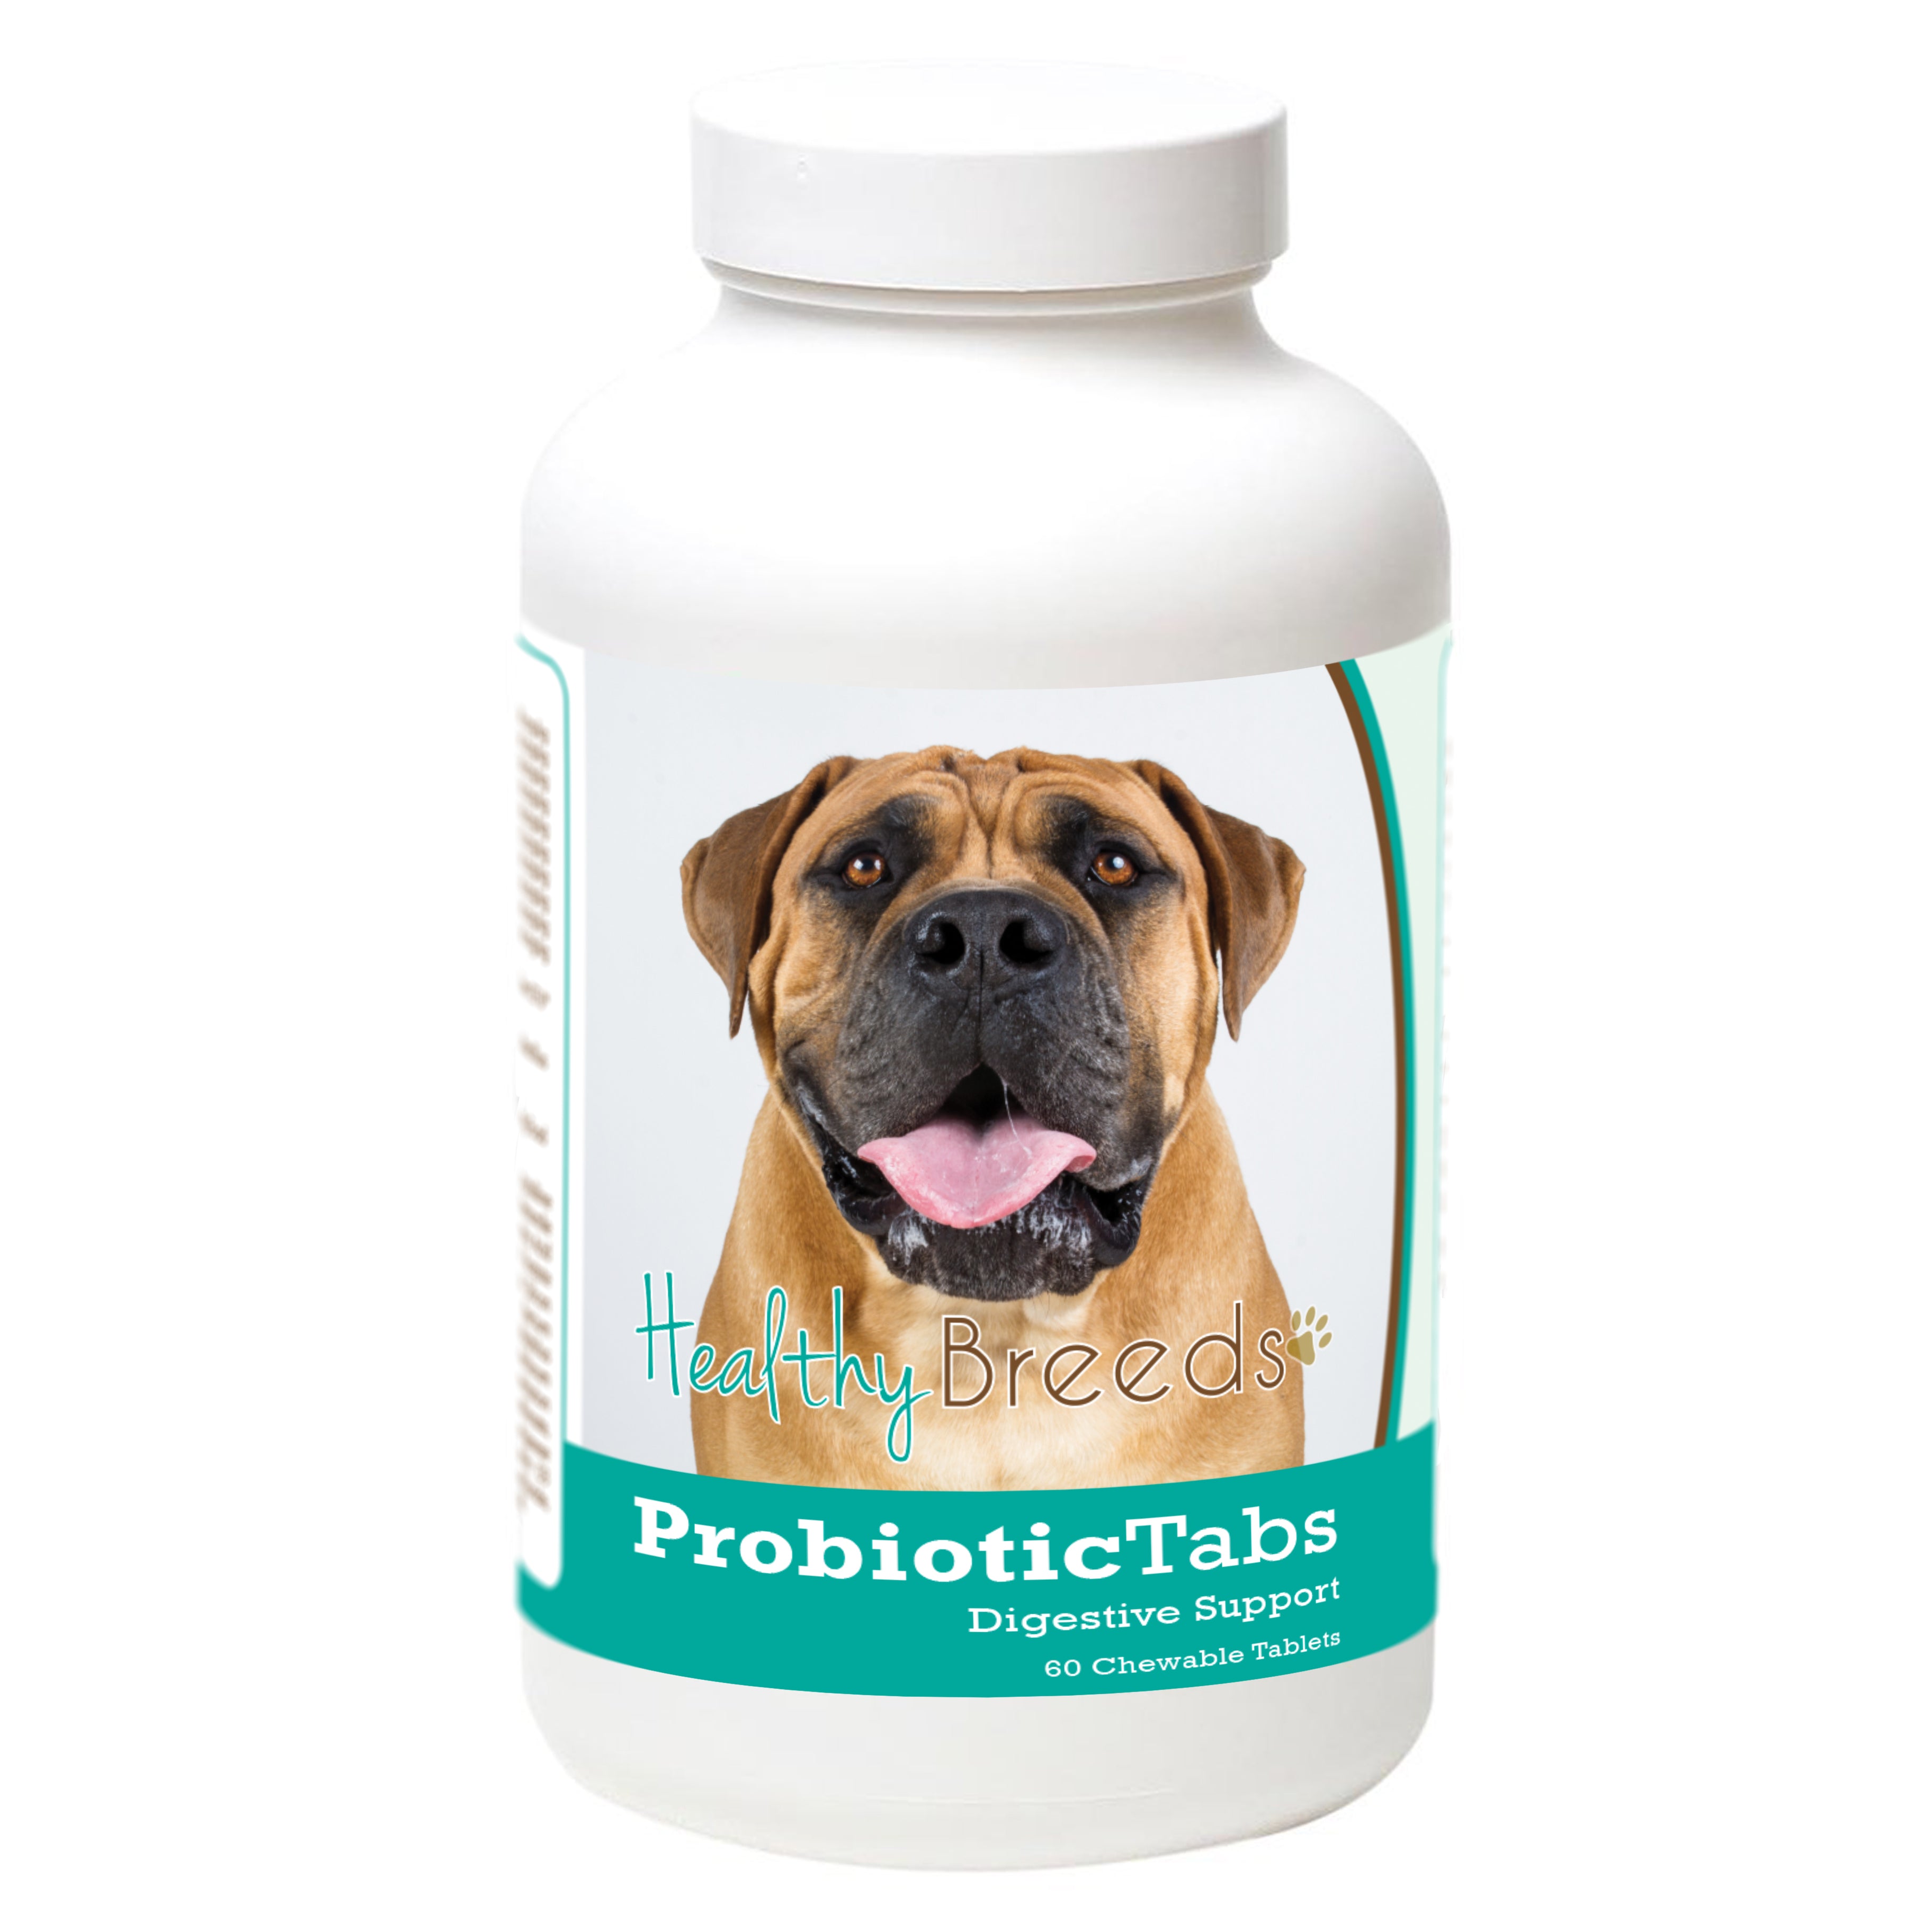 Boerboel Probiotic and Digestive Support for Dogs 60 Count